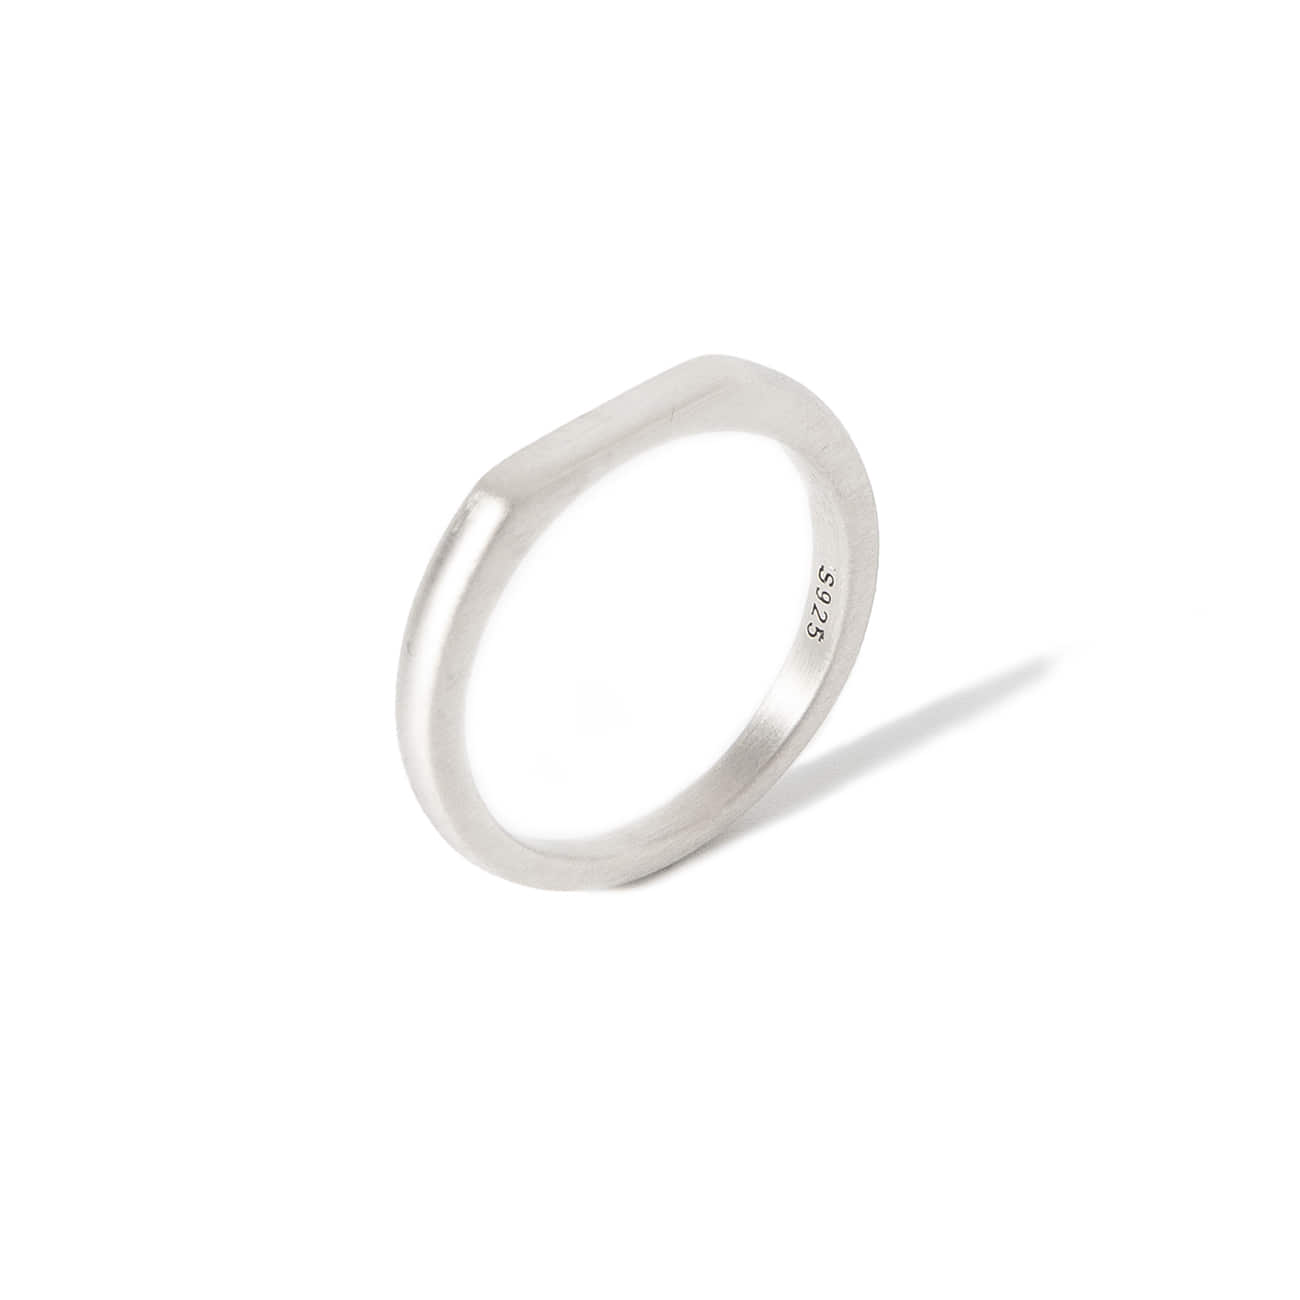 ADD SILHOUETTE 925 SILVER RING LINE #3